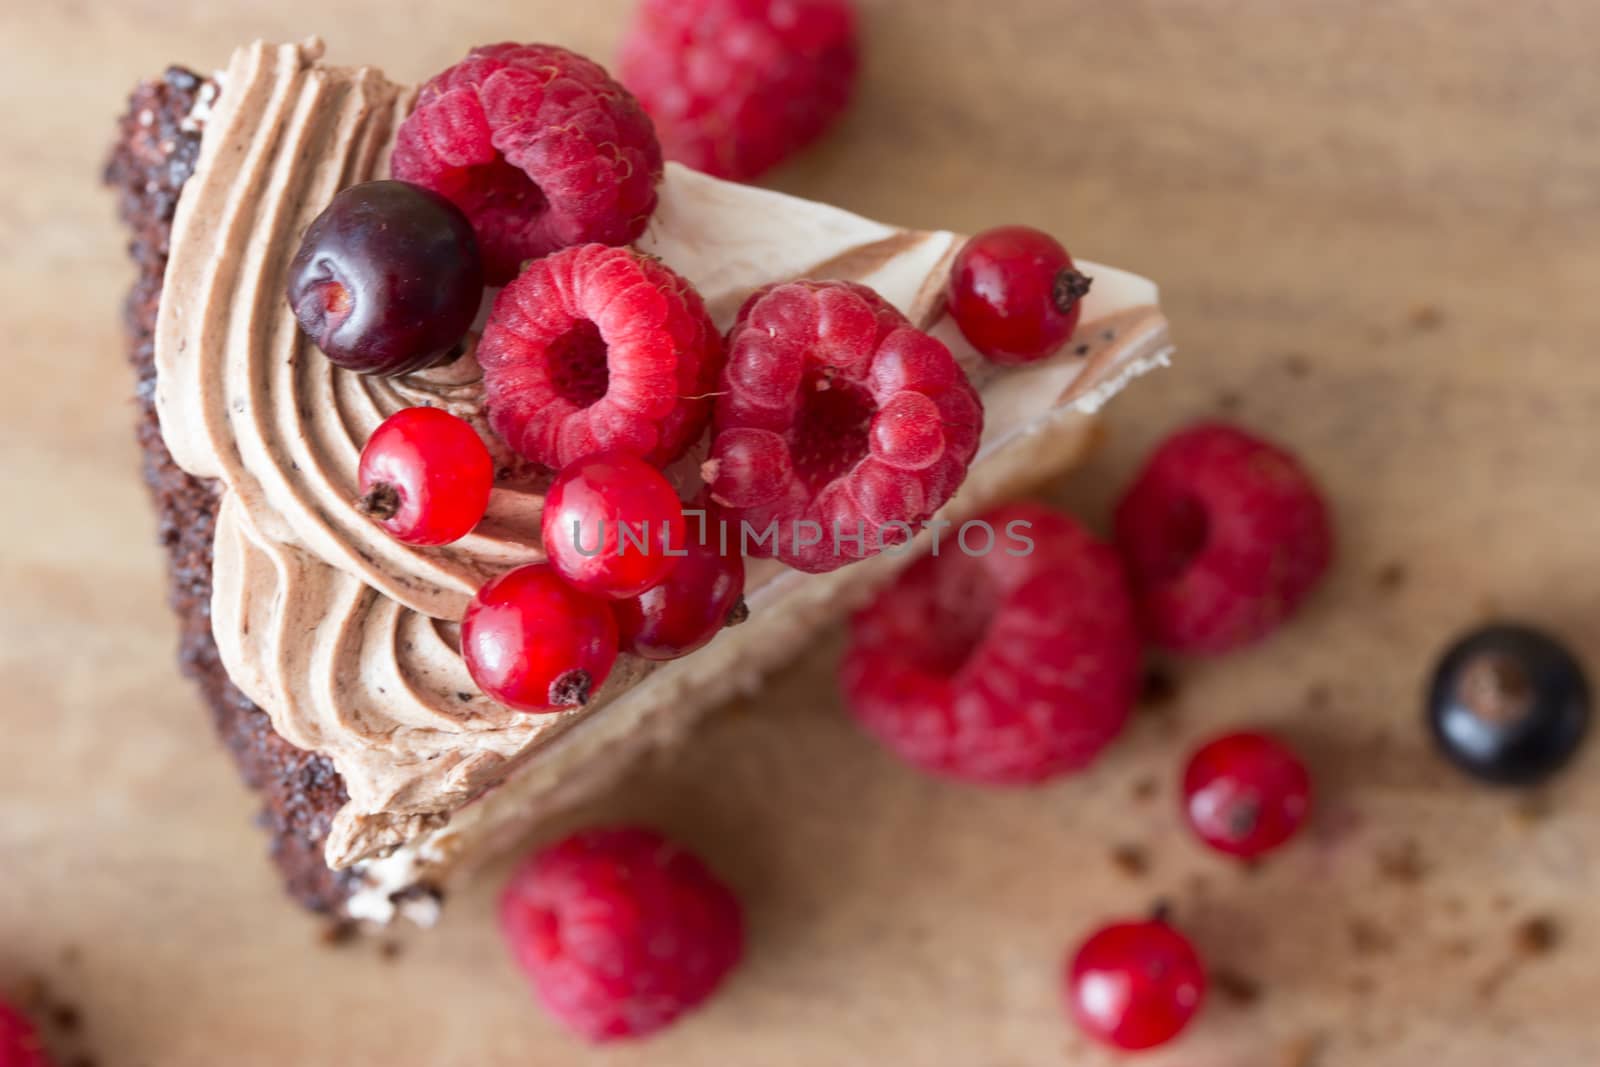 peace of cake decorated with fresh berries